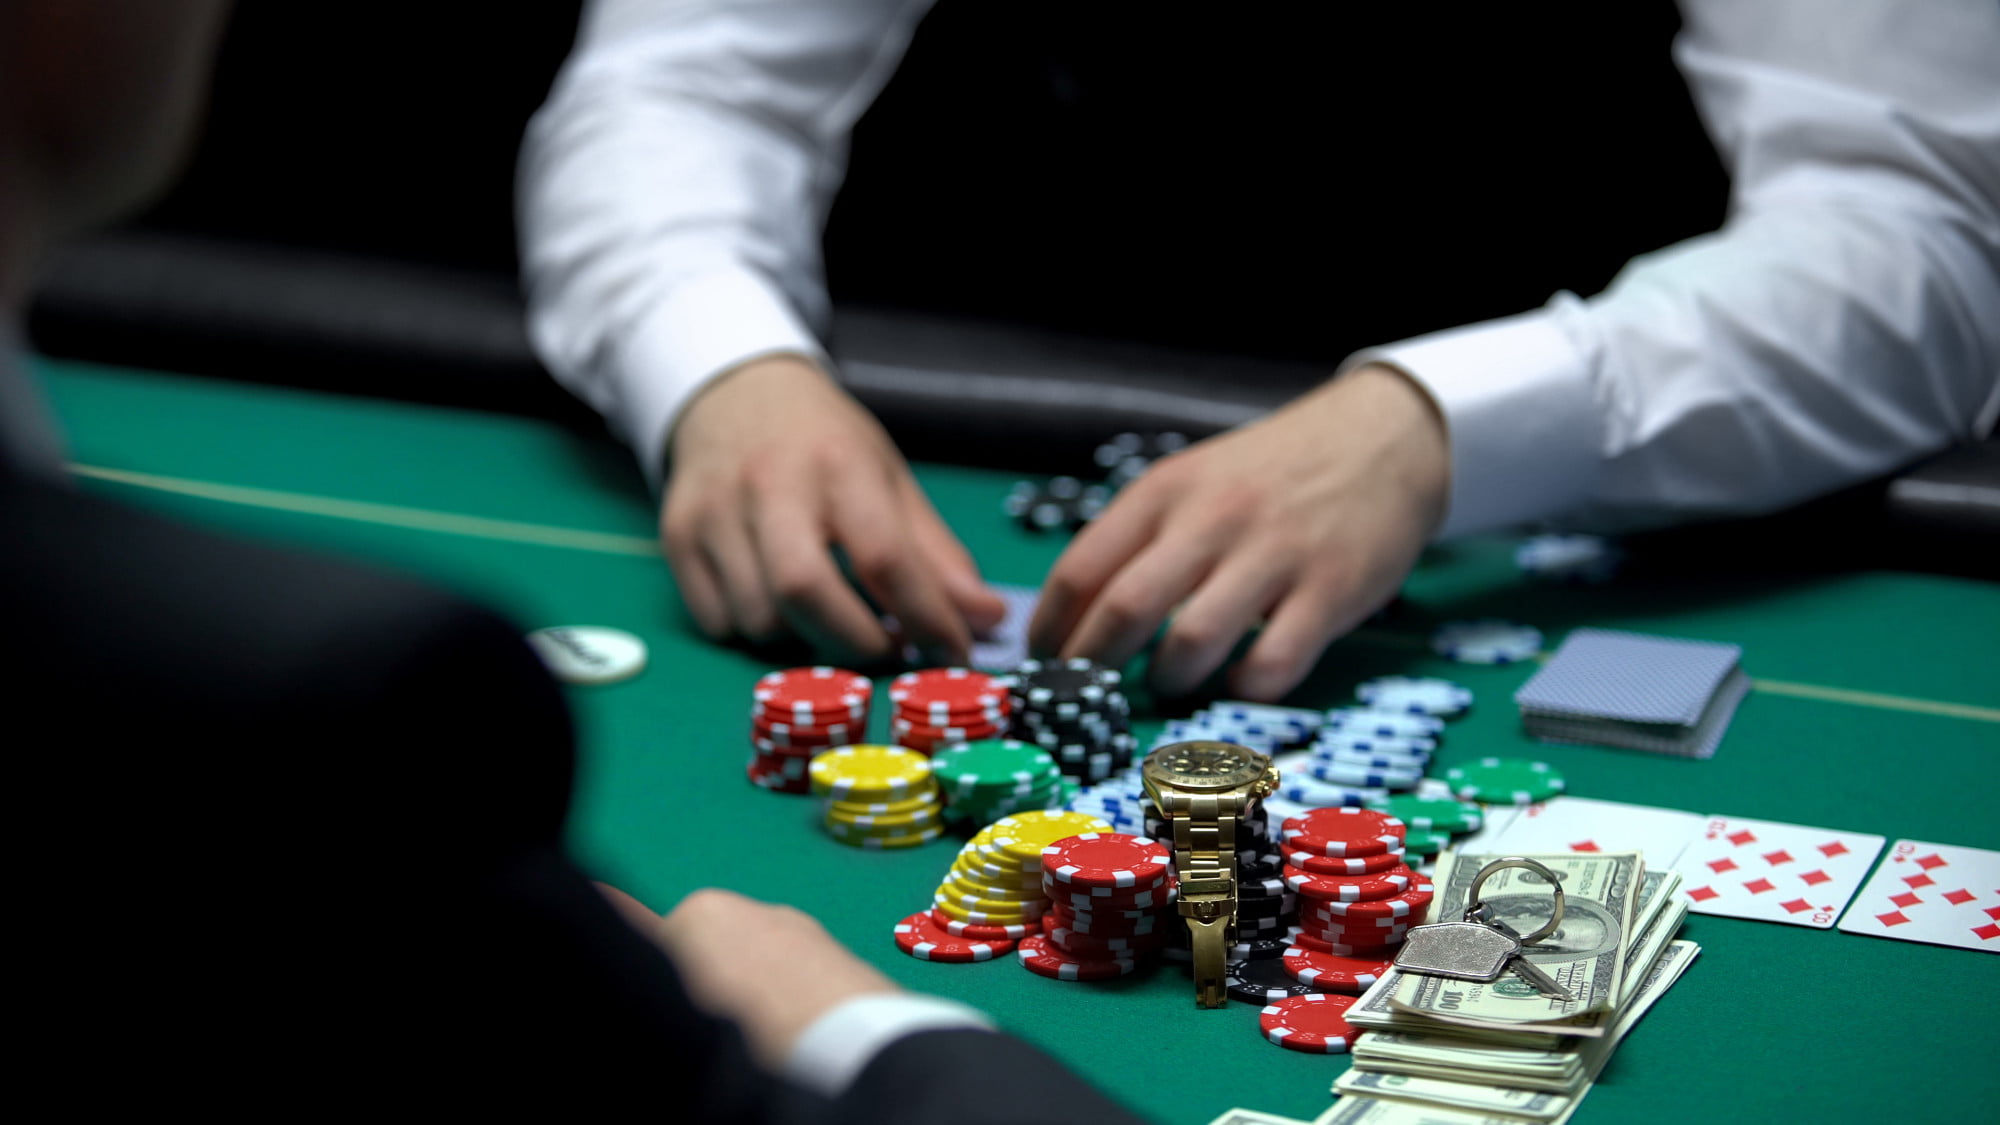 Poker is one of the best games to play if you'd like to win money, but what if you're a beginner? Here are some poker strategies to help you get started.